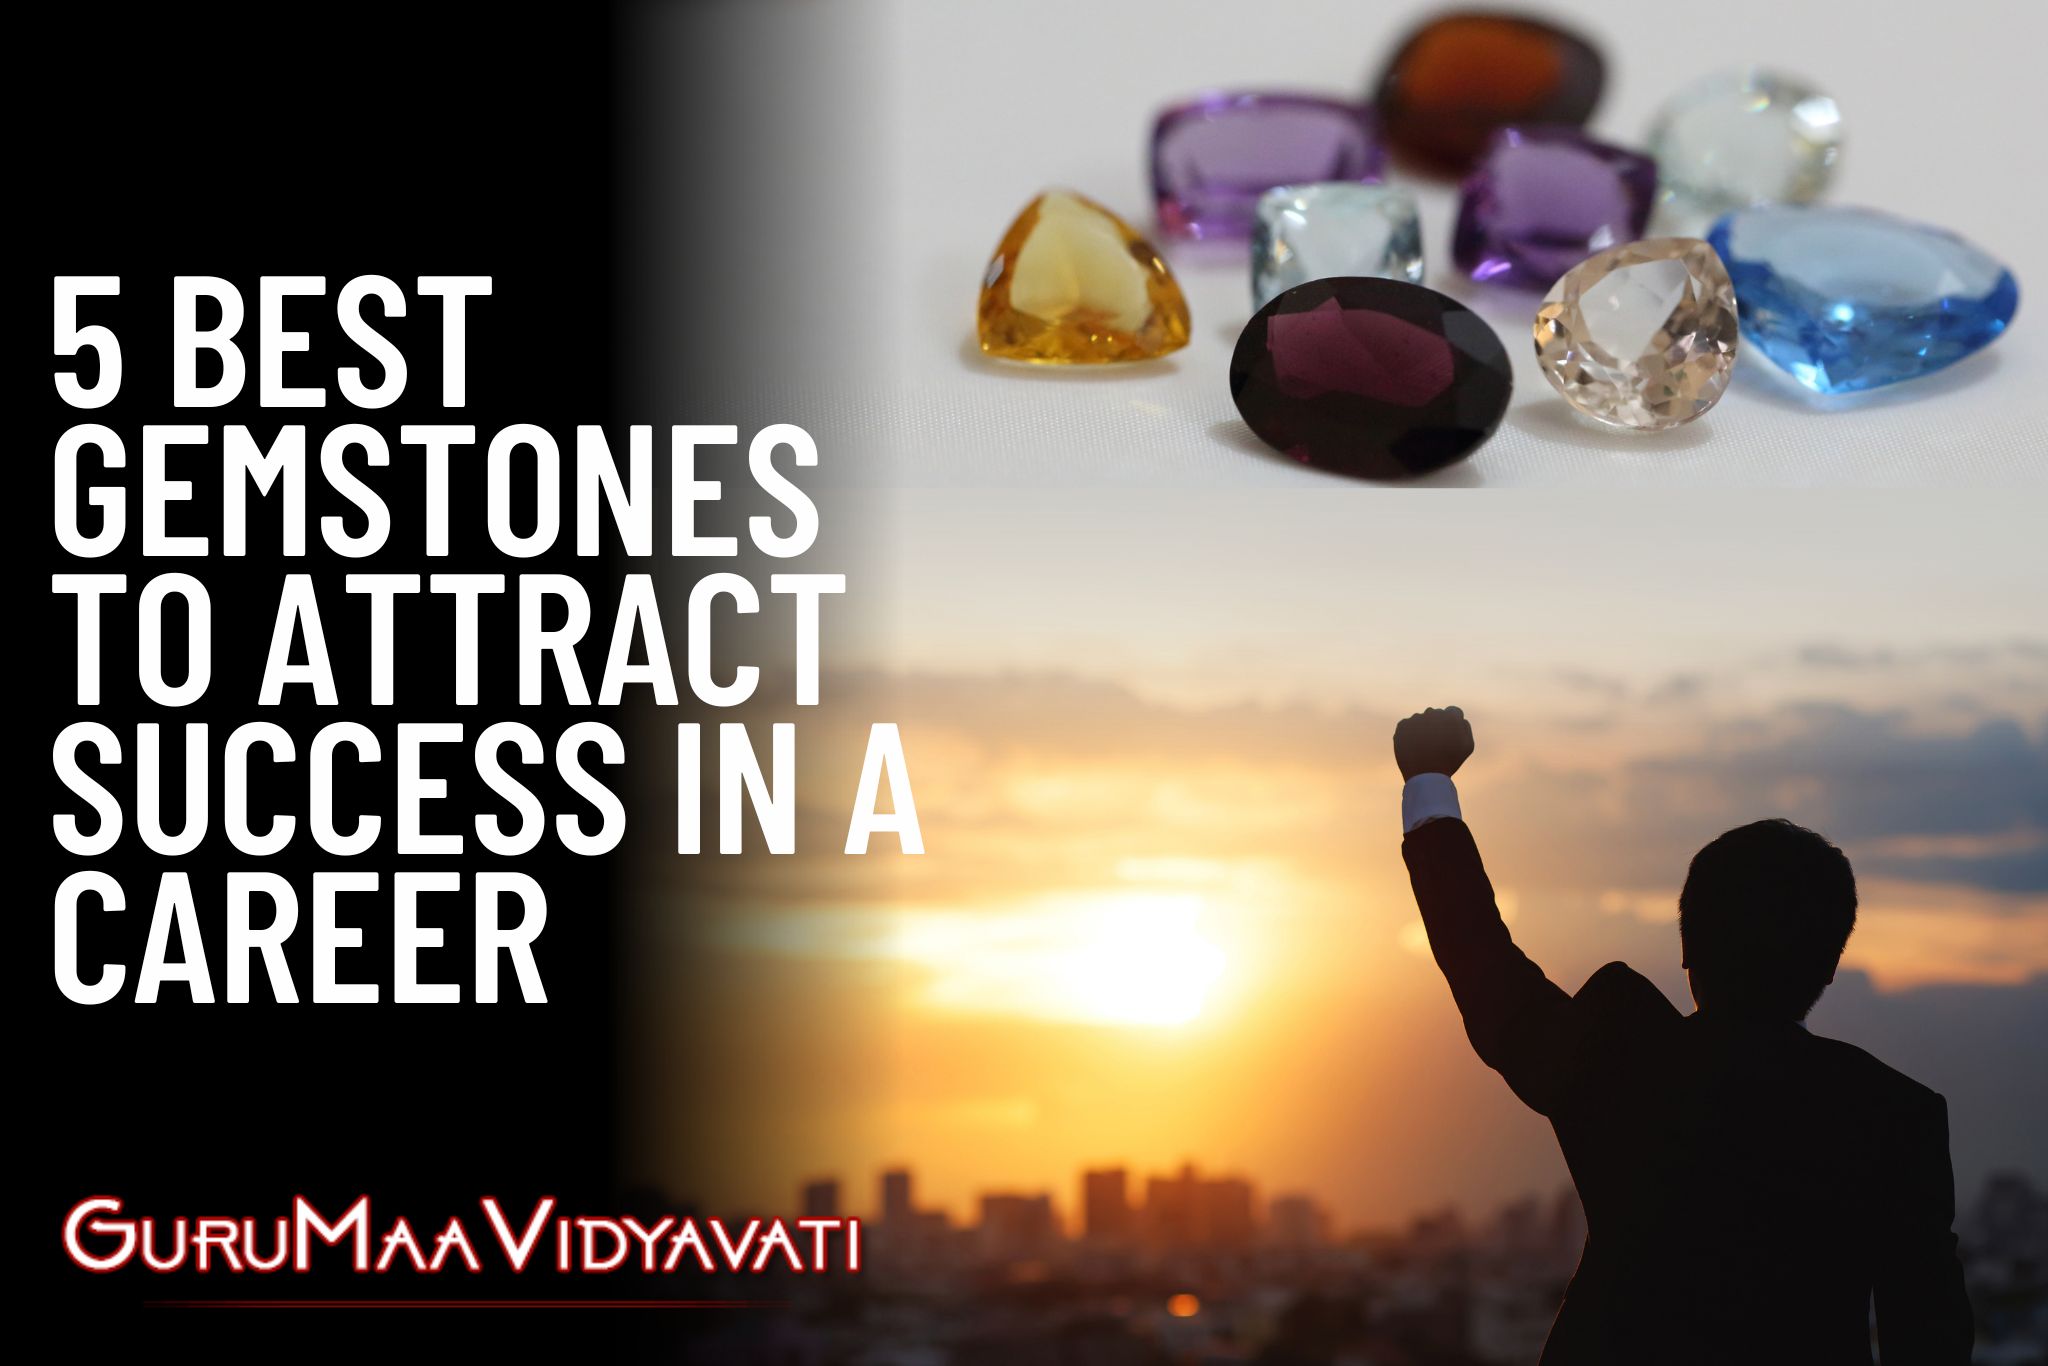 5 Best Gemstones to Attract Success in a Career